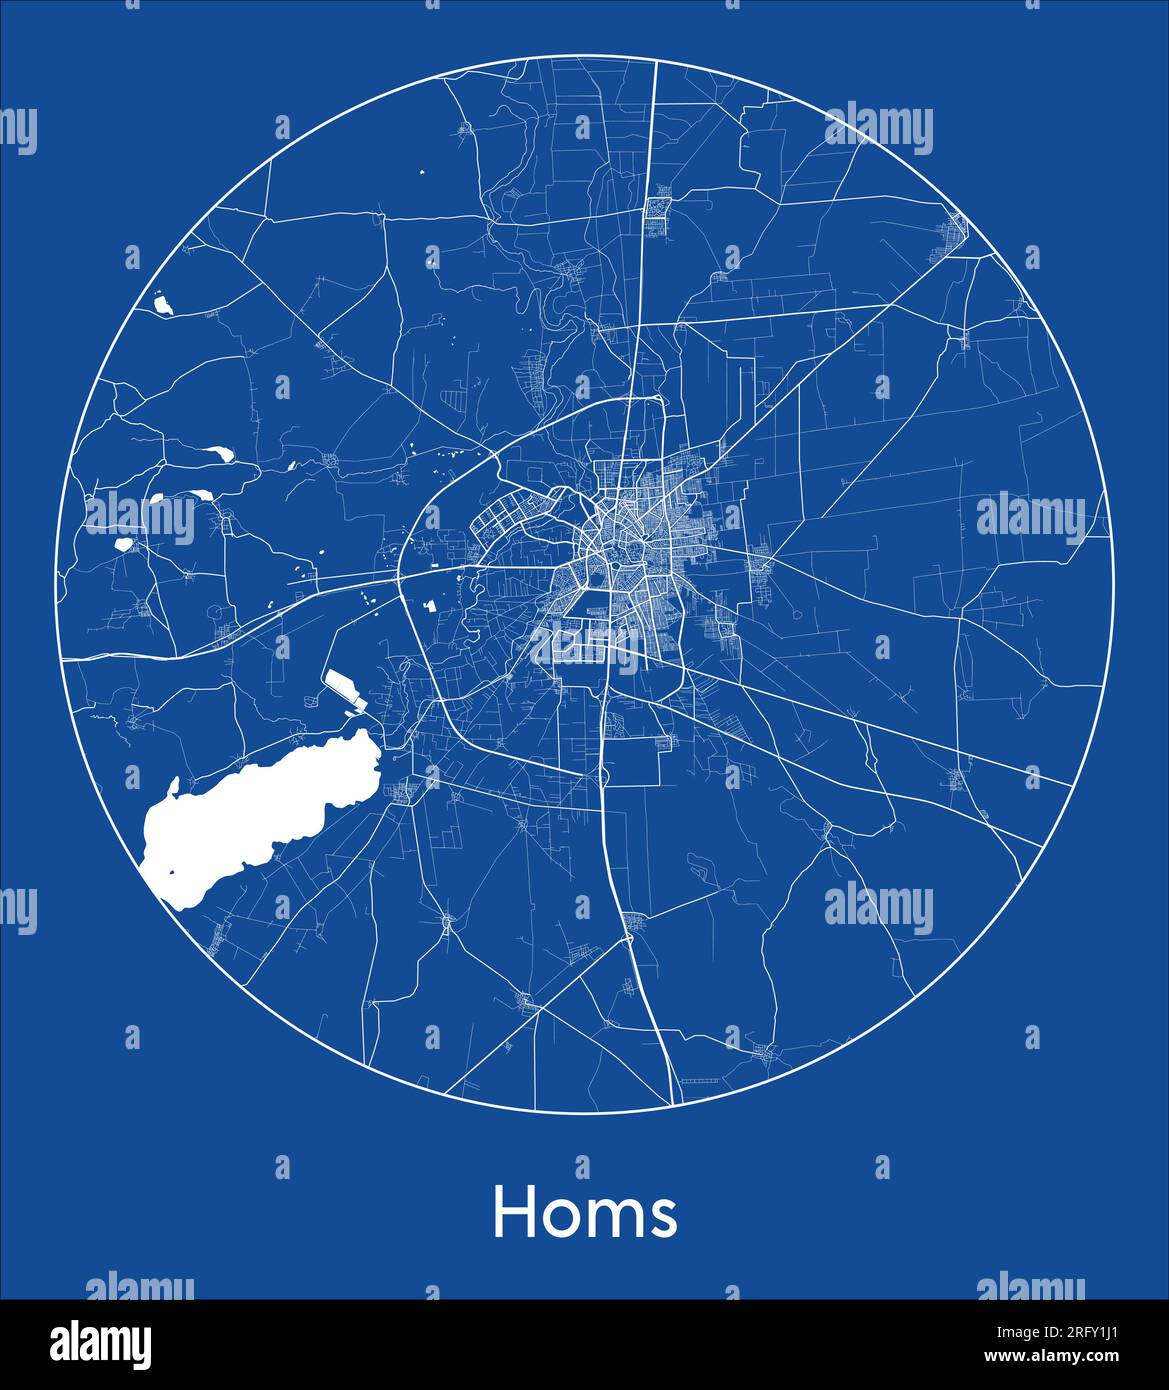 City Map Homs Syria Asia blue print round Circle vector illustration Stock Vector